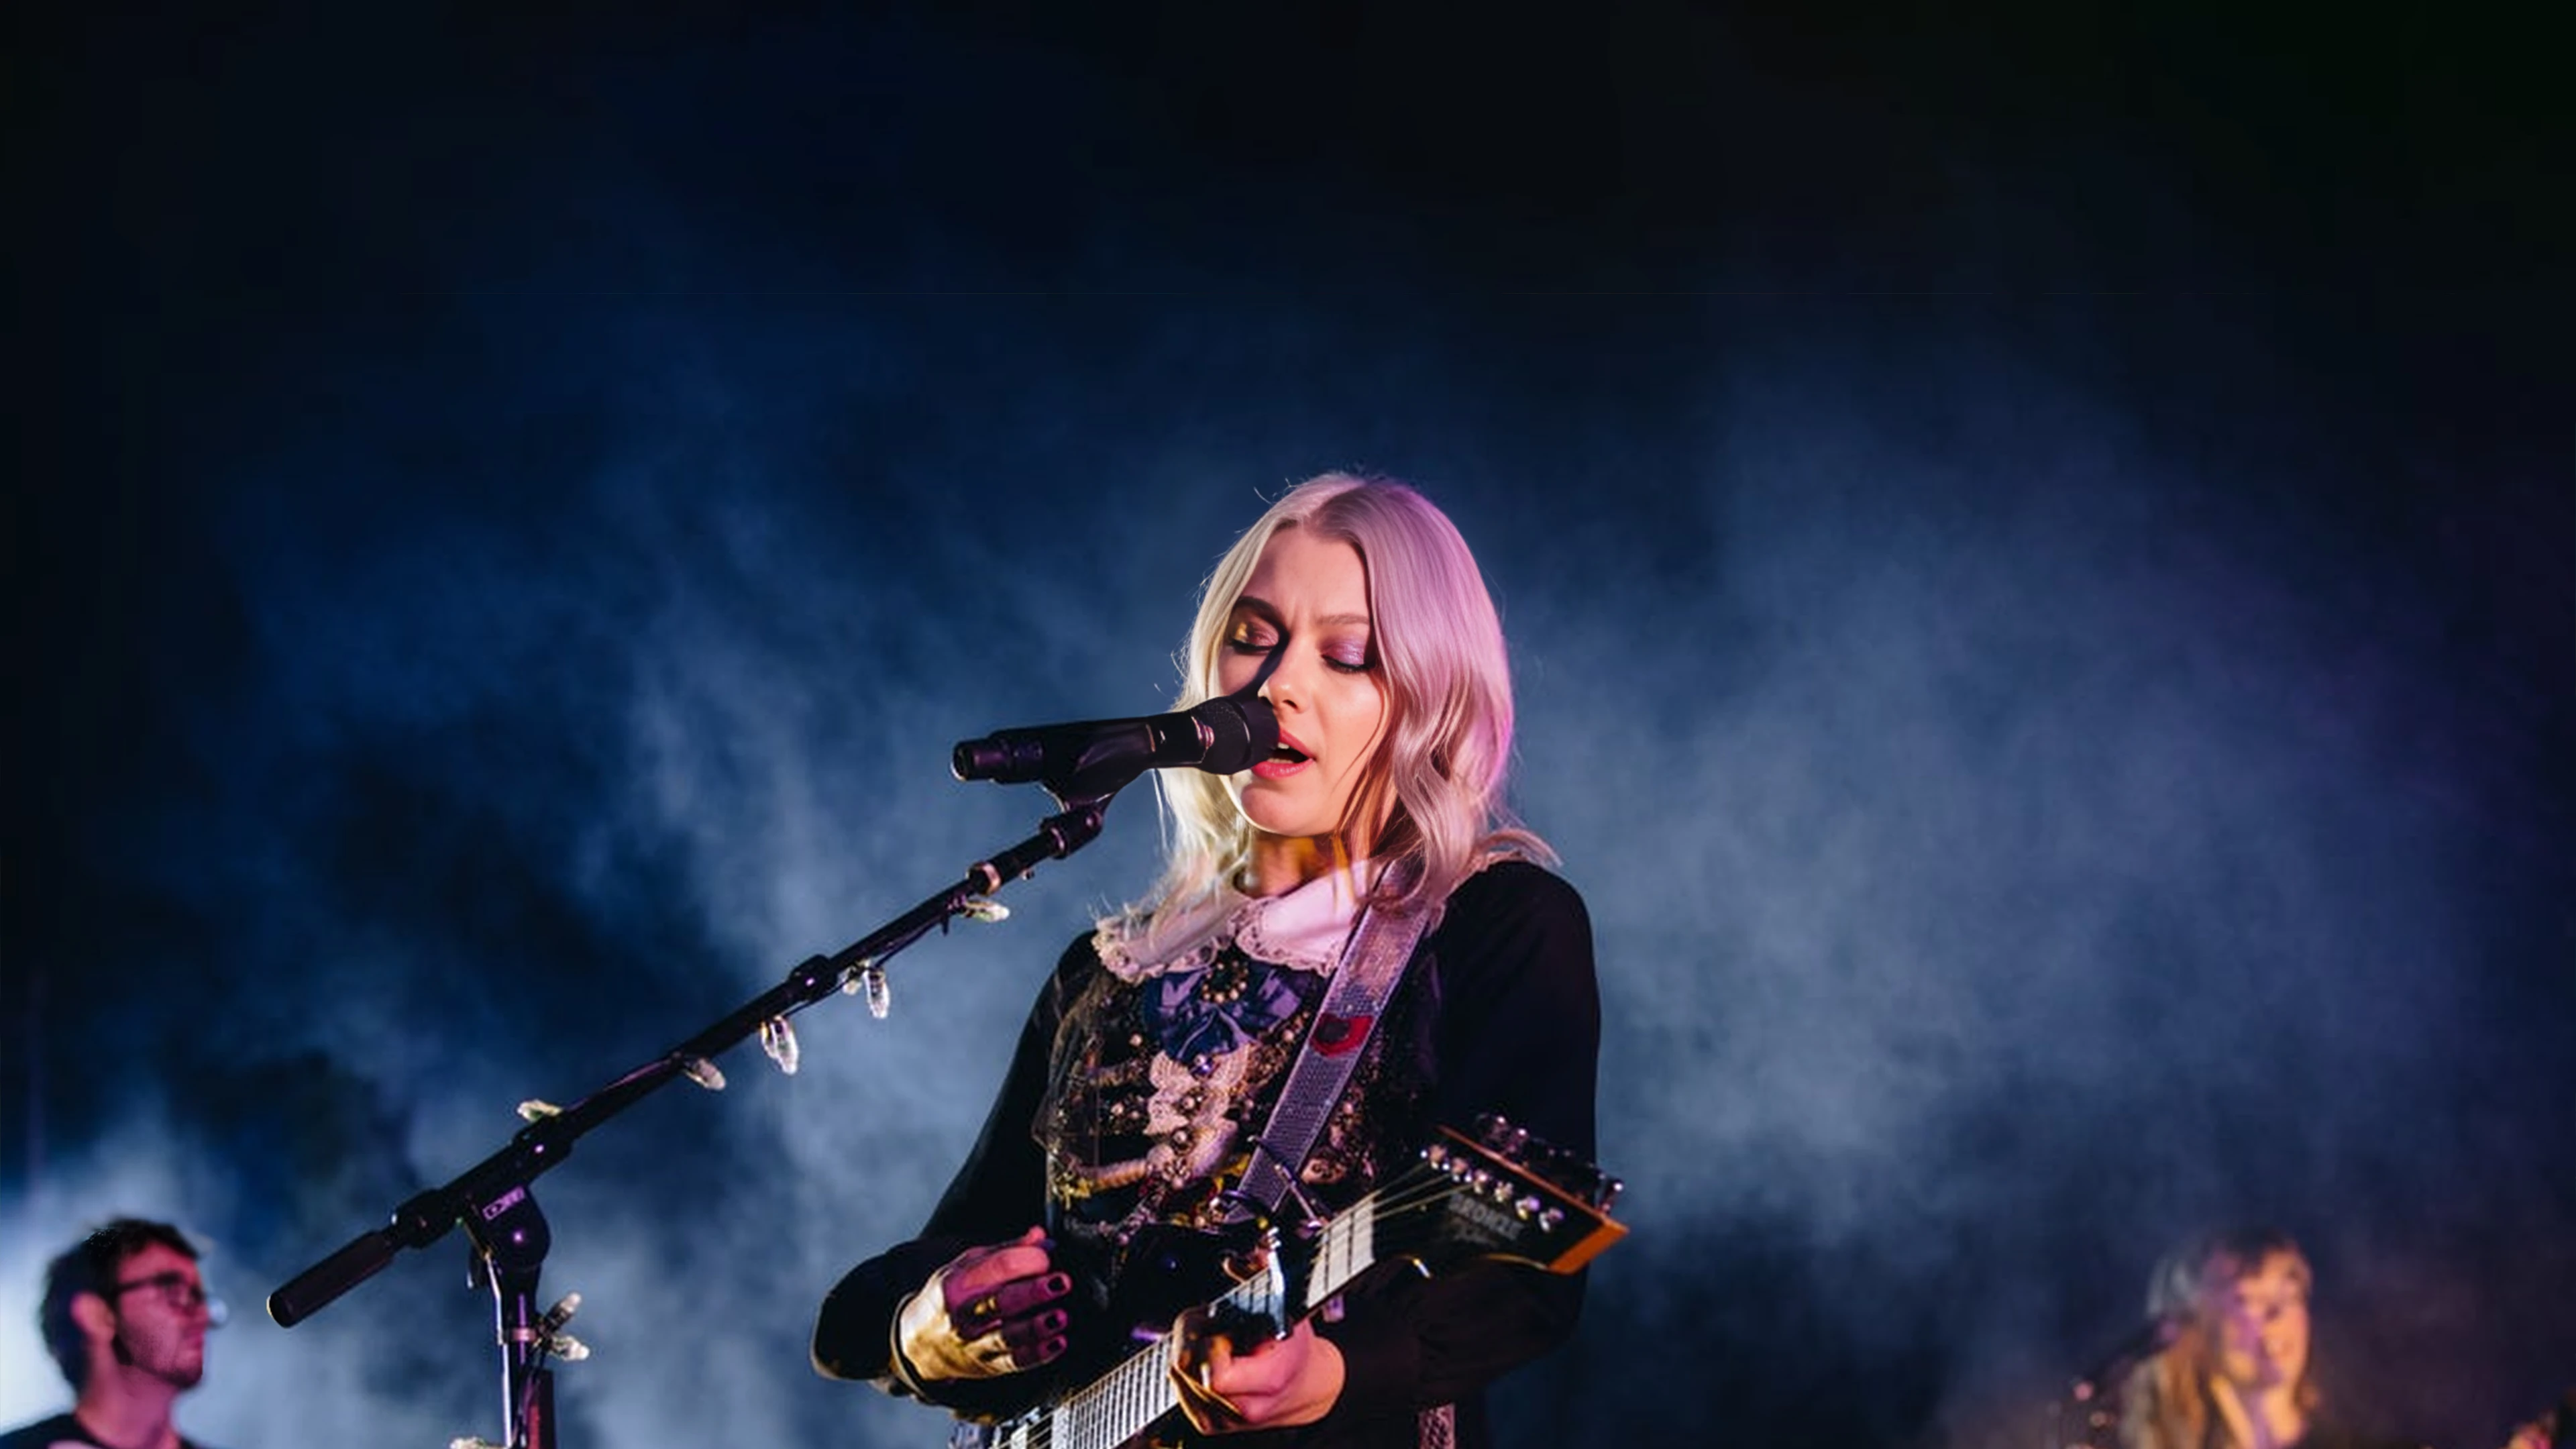 alone at phoebe bridgers a night of emotional concert ordeals featured